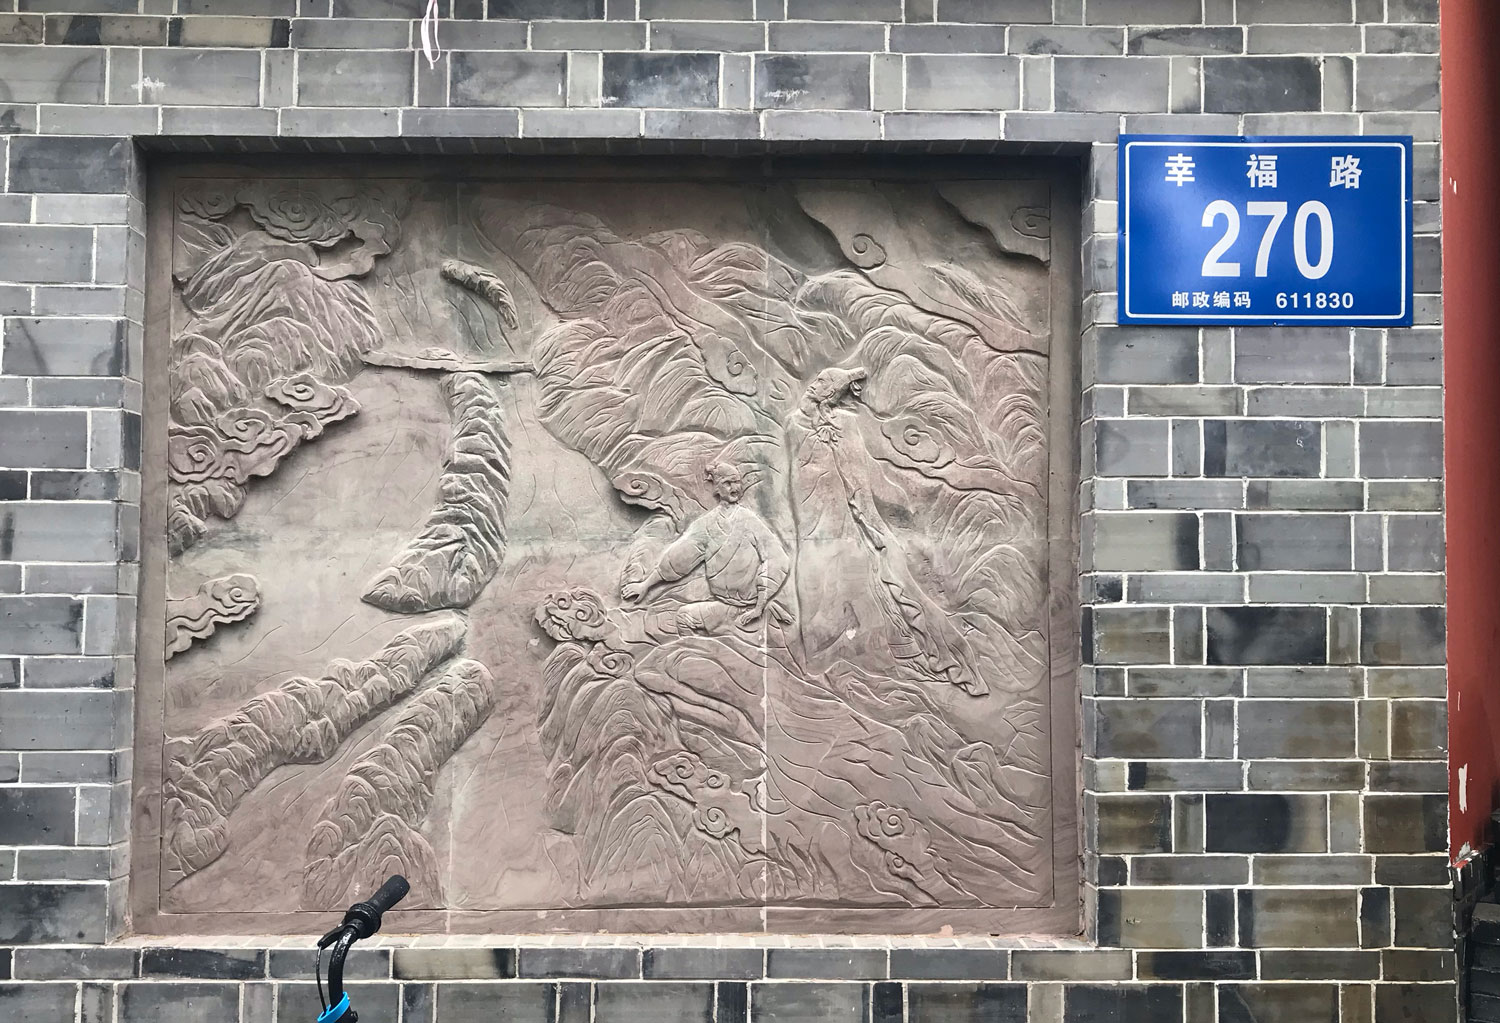 carved stone relief of men digging into the water.